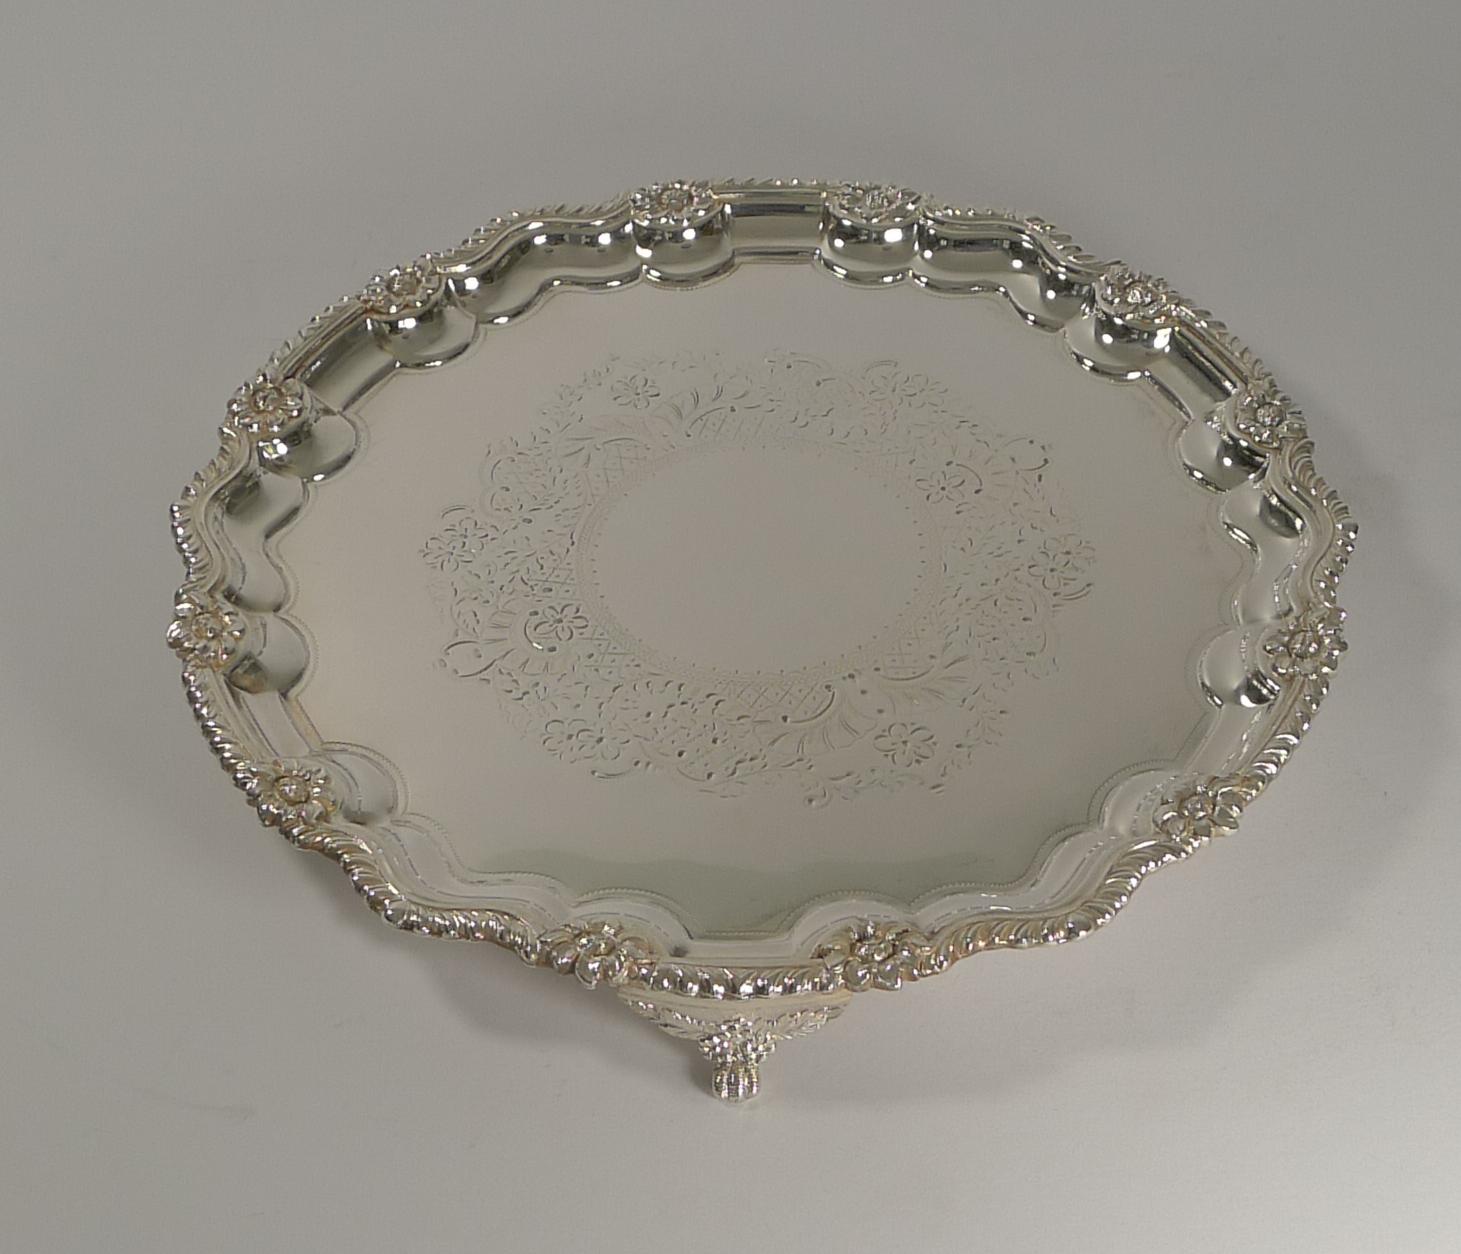 Antique English Silver Plated Salver or Tray by James Deakin, circa 1880 5